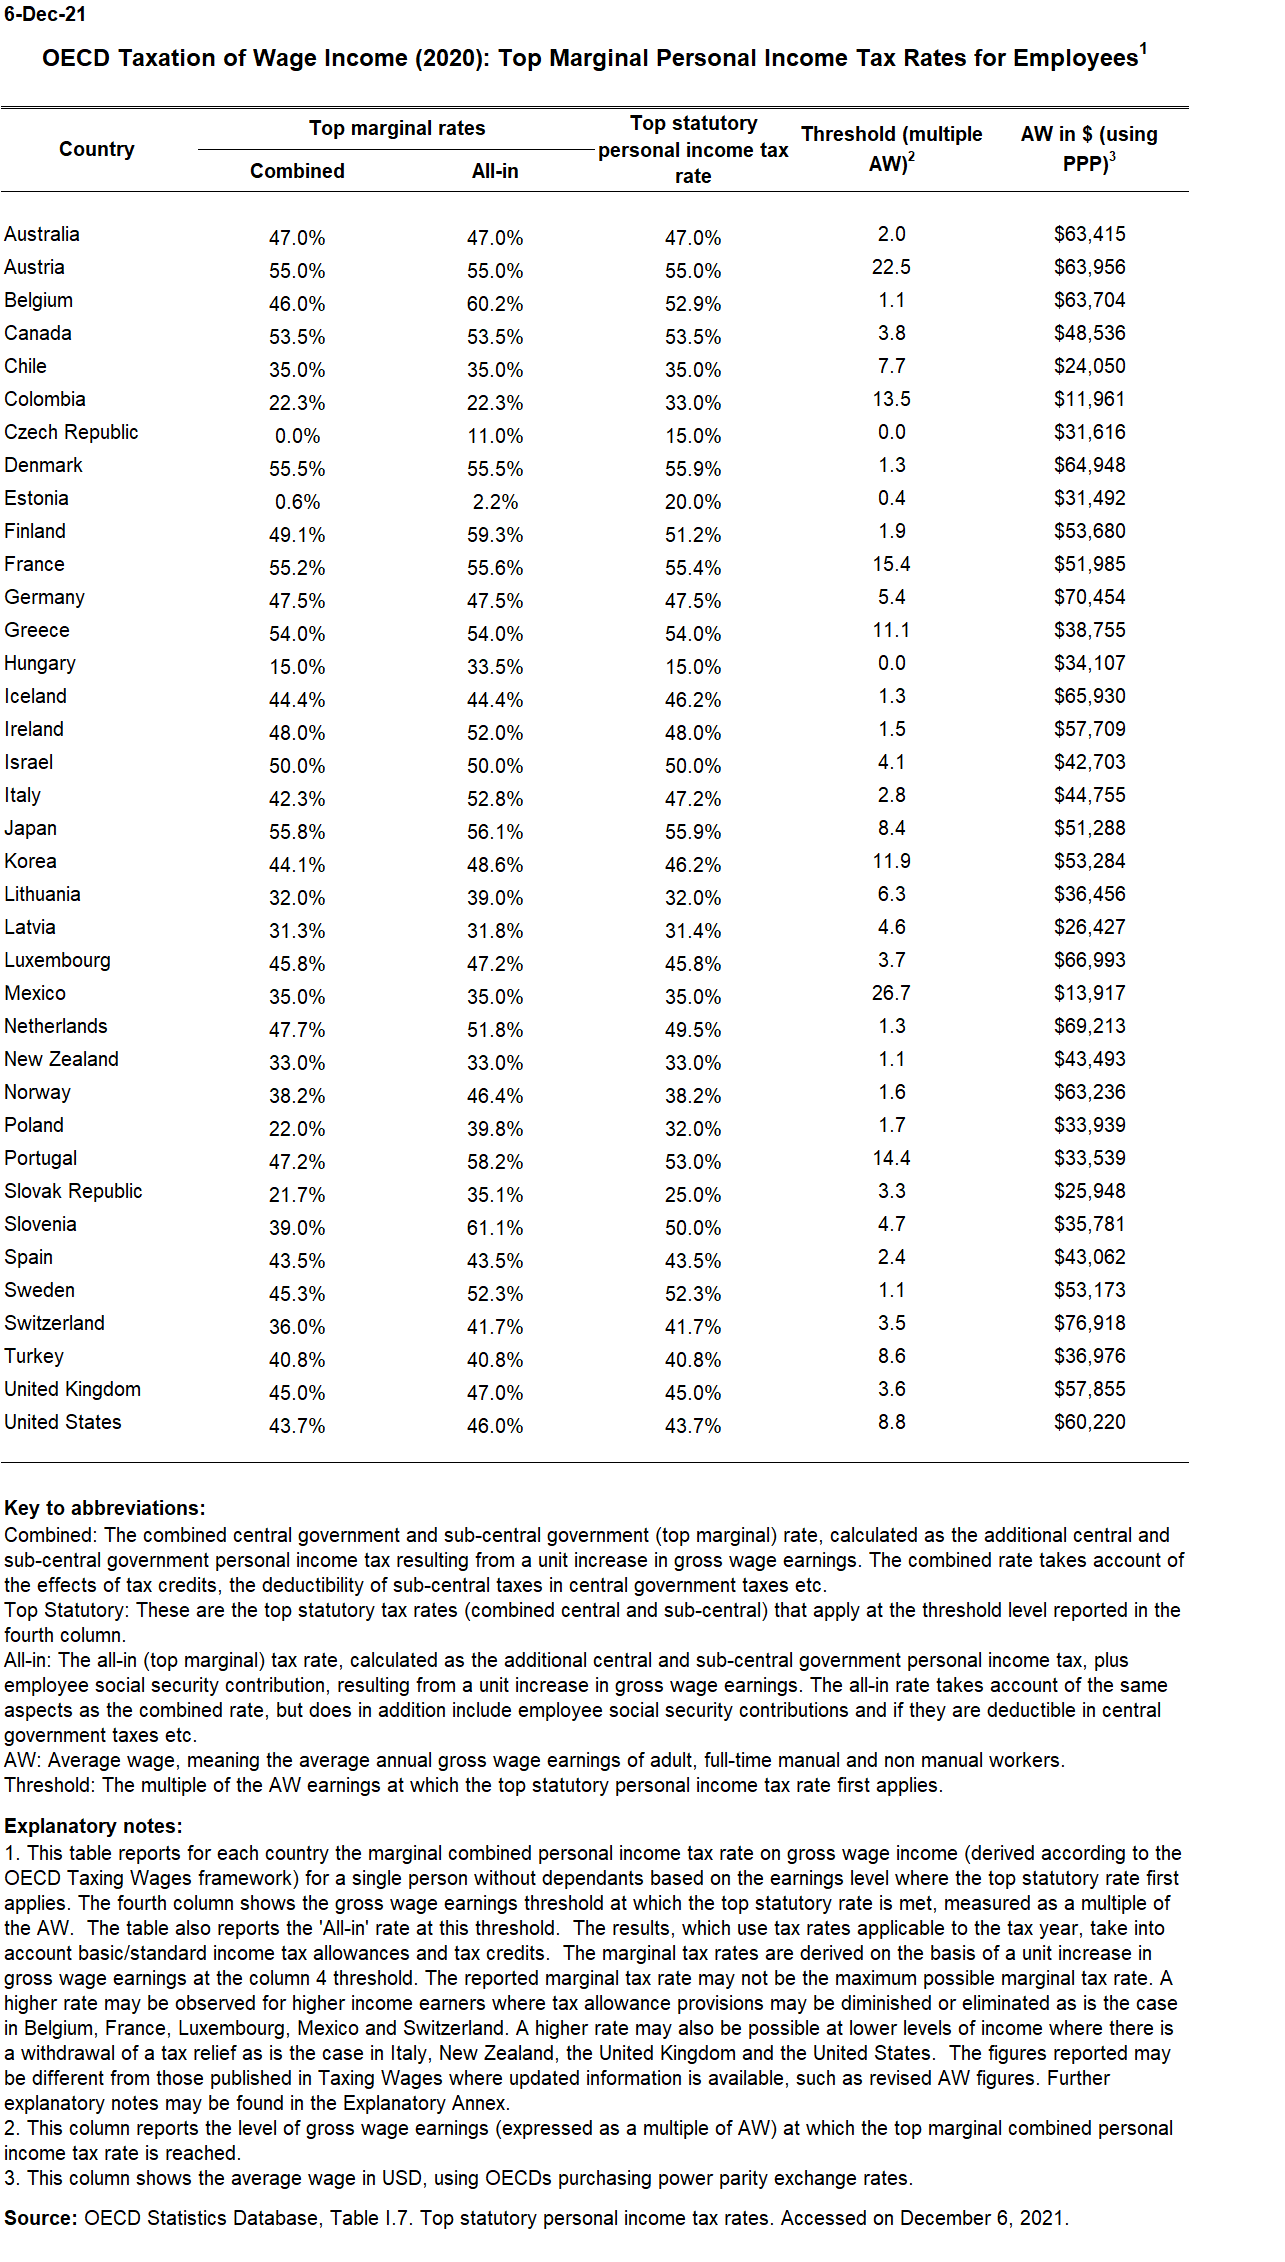 OECD taxation of wages income